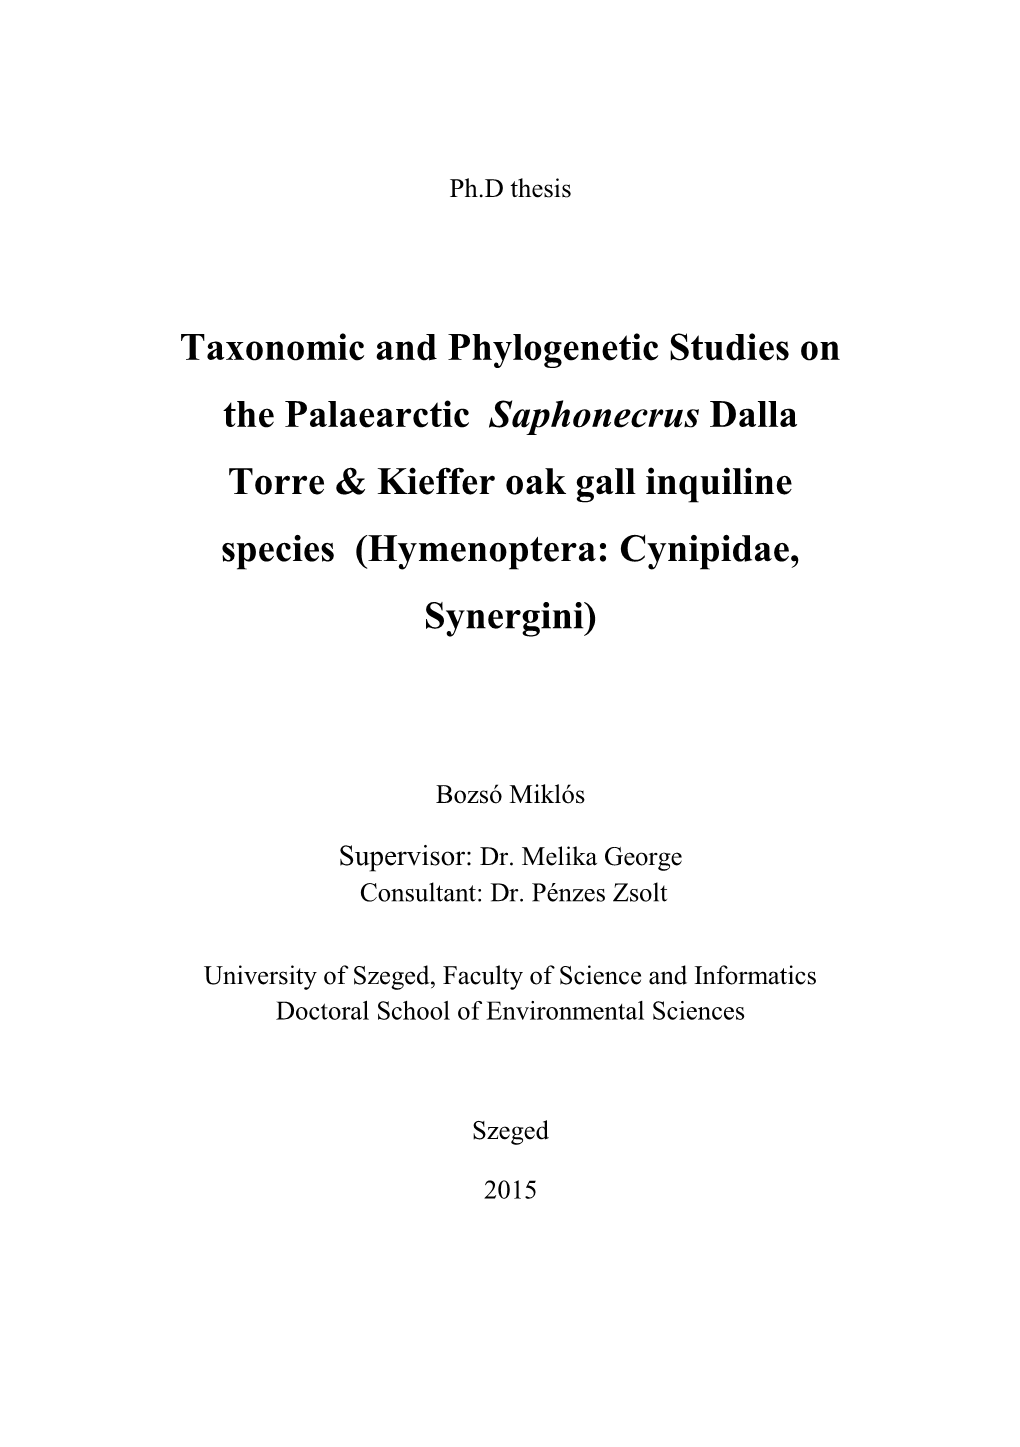 Taxonomic and Phylogenetic Studies on the Palaearctic Saphonecrus Dalla Torre & Kieffer Oak Gall Inquiline Species (Hymenoptera: Cynipidae